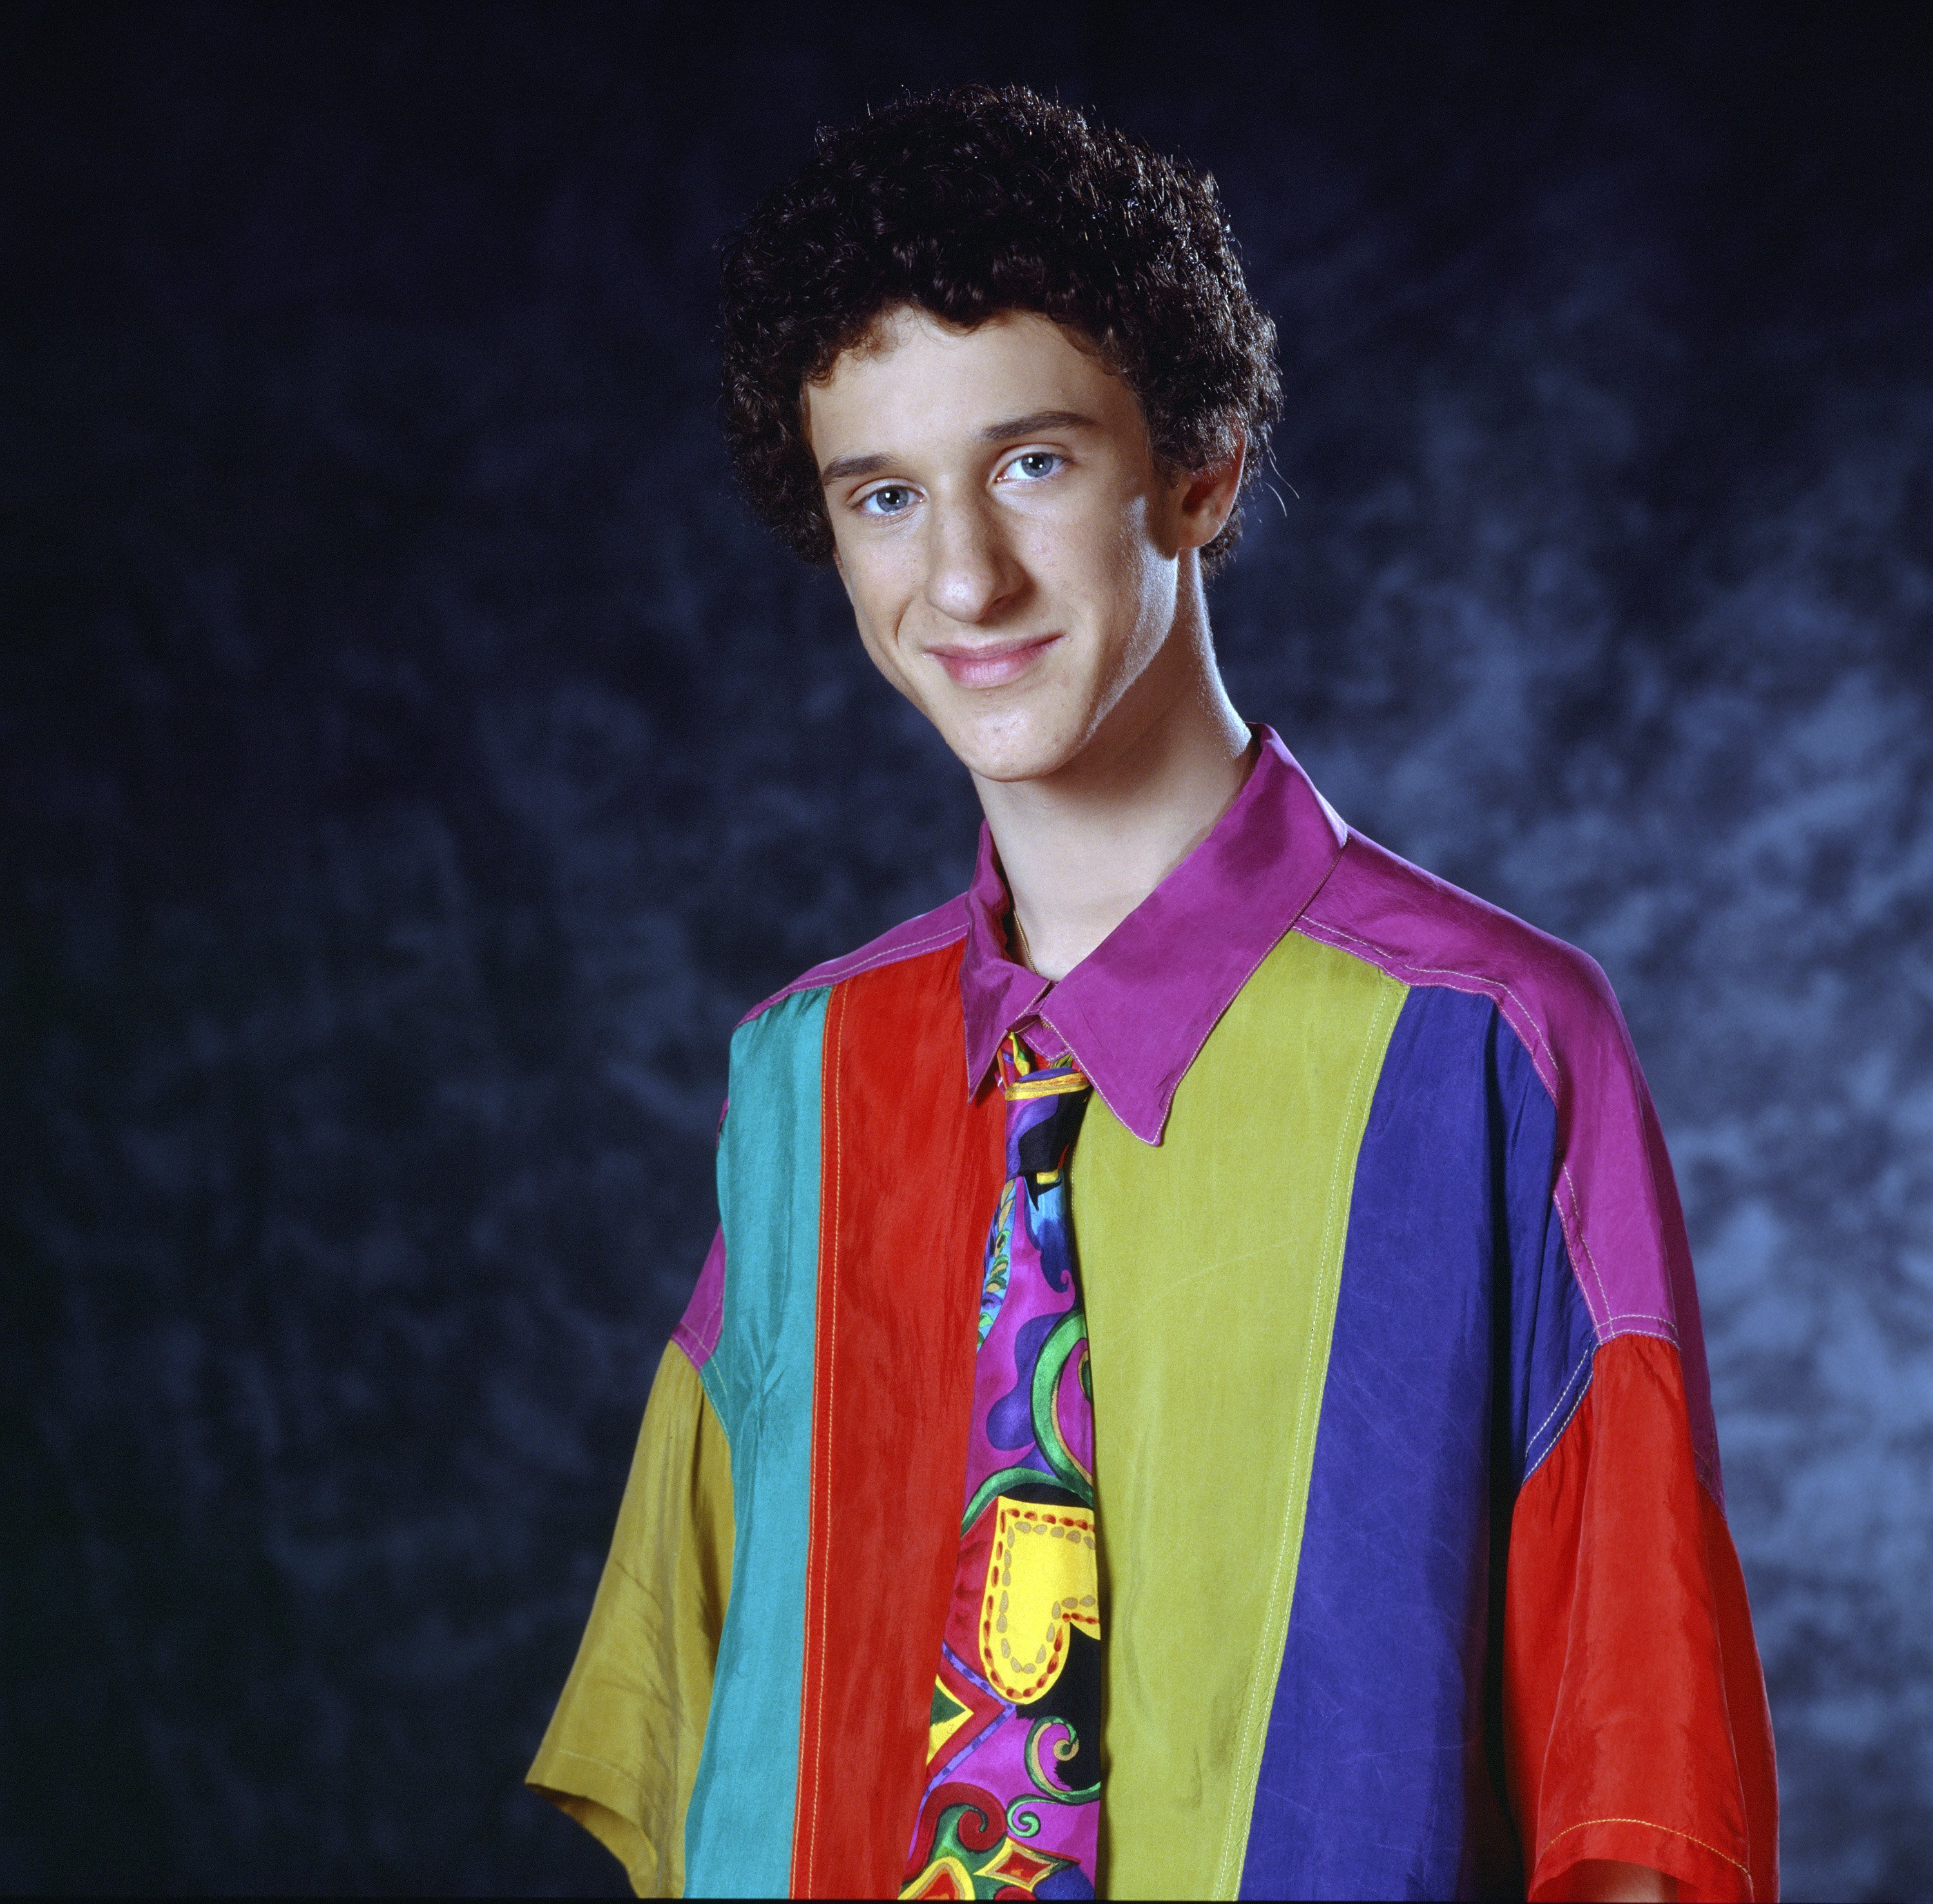 Dustin Diamond als Screech Powers in Staffel 3 von "Saved by the Bell" | Quelle: Getty Images 